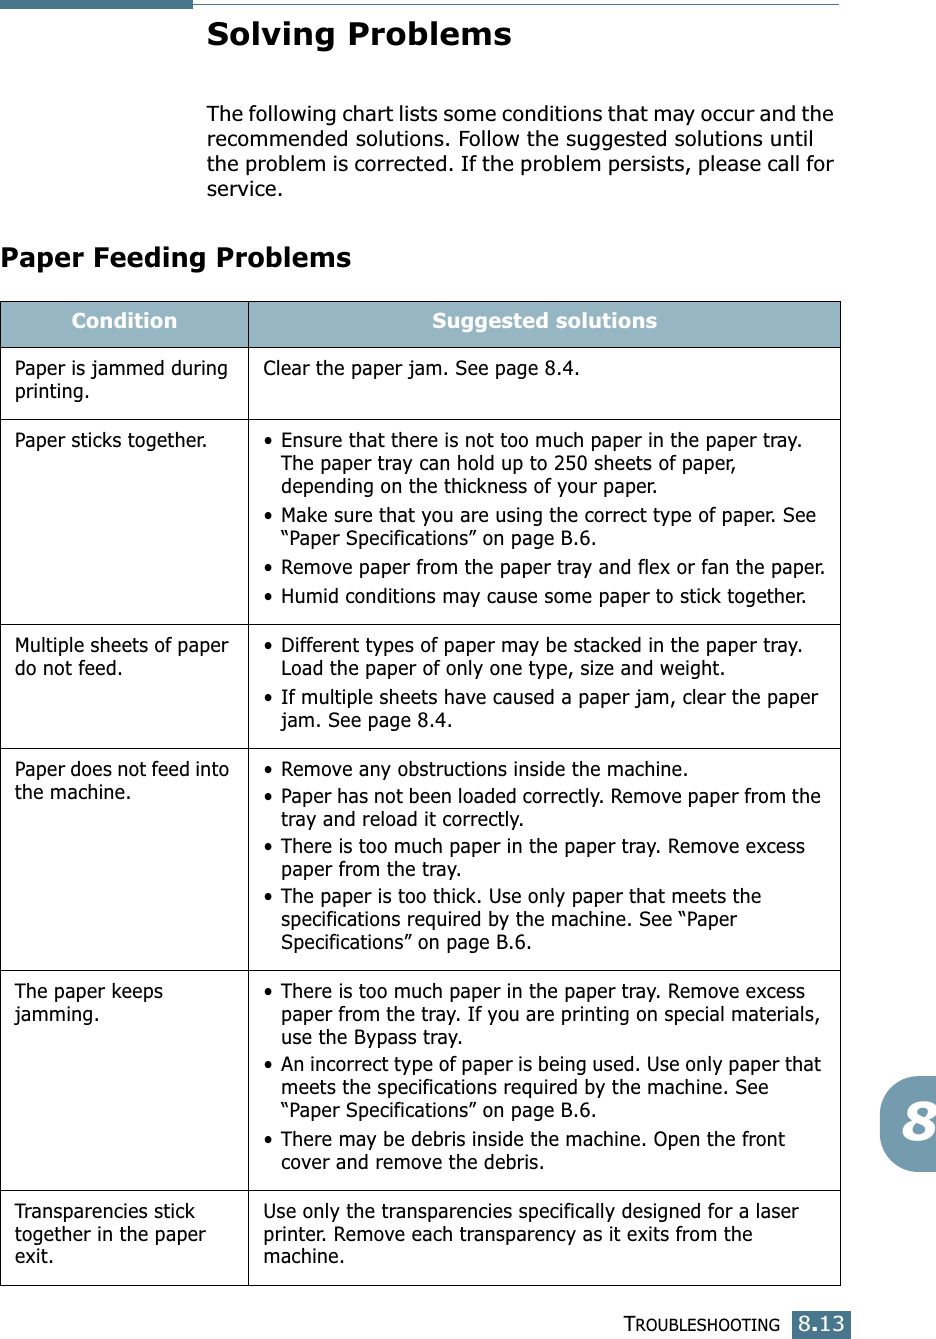 TROUBLESHOOTING8.138Solving ProblemsThe following chart lists some conditions that may occur and the recommended solutions. Follow the suggested solutions until the problem is corrected. If the problem persists, please call for service.Paper Feeding ProblemsCondition Suggested solutionsPaper is jammed during printing.Clear the paper jam. See page 8.4.Paper sticks together. • Ensure that there is not too much paper in the paper tray. The paper tray can hold up to 250 sheets of paper, depending on the thickness of your paper.• Make sure that you are using the correct type of paper. See “Paper Specifications” on page B.6.•Remove paper from the paper tray and flex or fan the paper.• Humid conditions may cause some paper to stick together.Multiple sheets of paper do not feed.• Different types of paper may be stacked in the paper tray. Load the paper of only one type, size and weight.• If multiple sheets have caused a paper jam, clear the paper jam. See page 8.4.Paper does not feed into the machine.•Remove any obstructions inside the machine.•Paper has not been loaded correctly. Remove paper from the tray and reload it correctly.• There is too much paper in the paper tray. Remove excess paper from the tray.• The paper is too thick. Use only paper that meets the specifications required by the machine. See “Paper Specifications” on page B.6.The paper keeps jamming.• There is too much paper in the paper tray. Remove excess paper from the tray. If you are printing on special materials, use the Bypass tray.•An incorrect type of paper is being used. Use only paper that meets the specifications required by the machine. See “Paper Specifications” on page B.6.• There may be debris inside the machine. Open the front cover and remove the debris.Transparencies stick together in the paper exit.Use only the transparencies specifically designed for a laser printer. Remove each transparency as it exits from the machine.